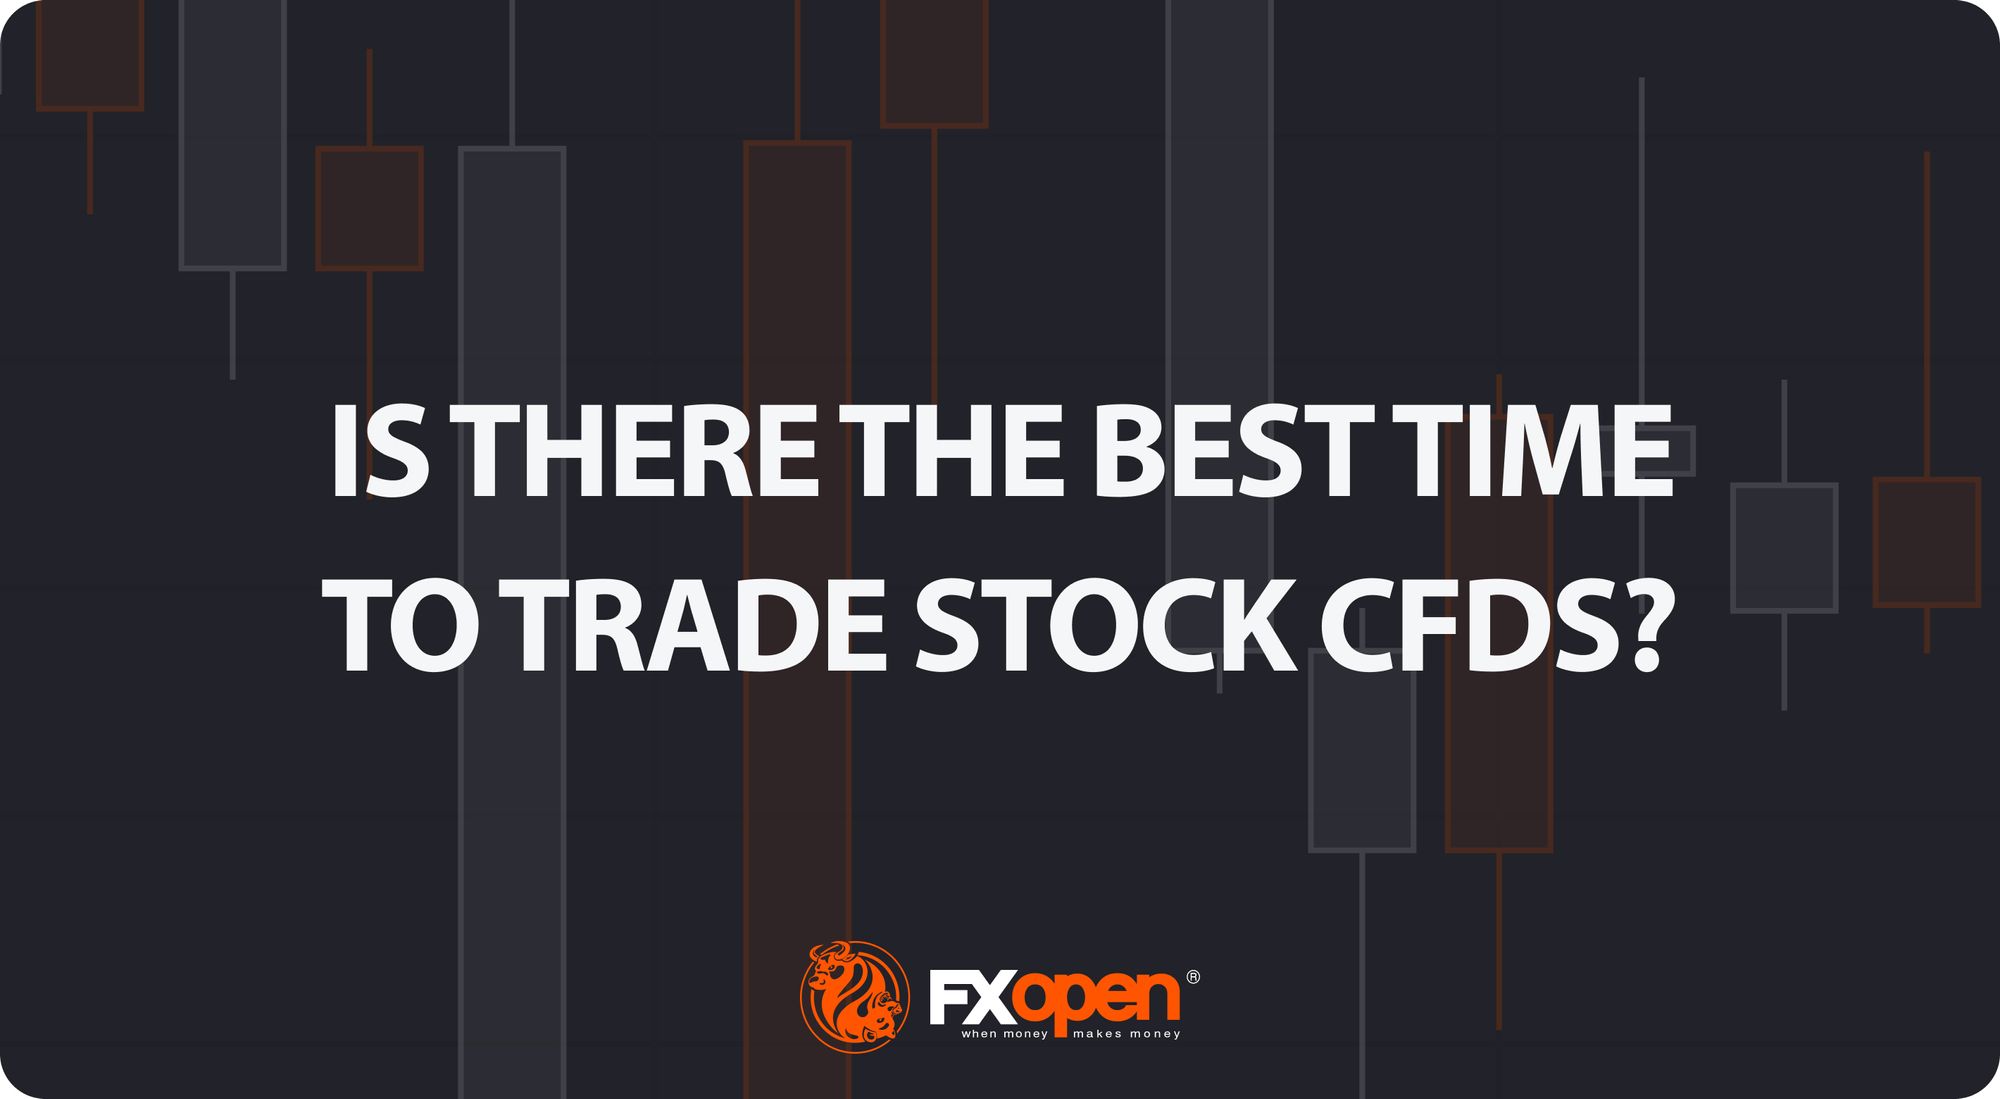 Is There the Best Time to Trade Stock CFDs?